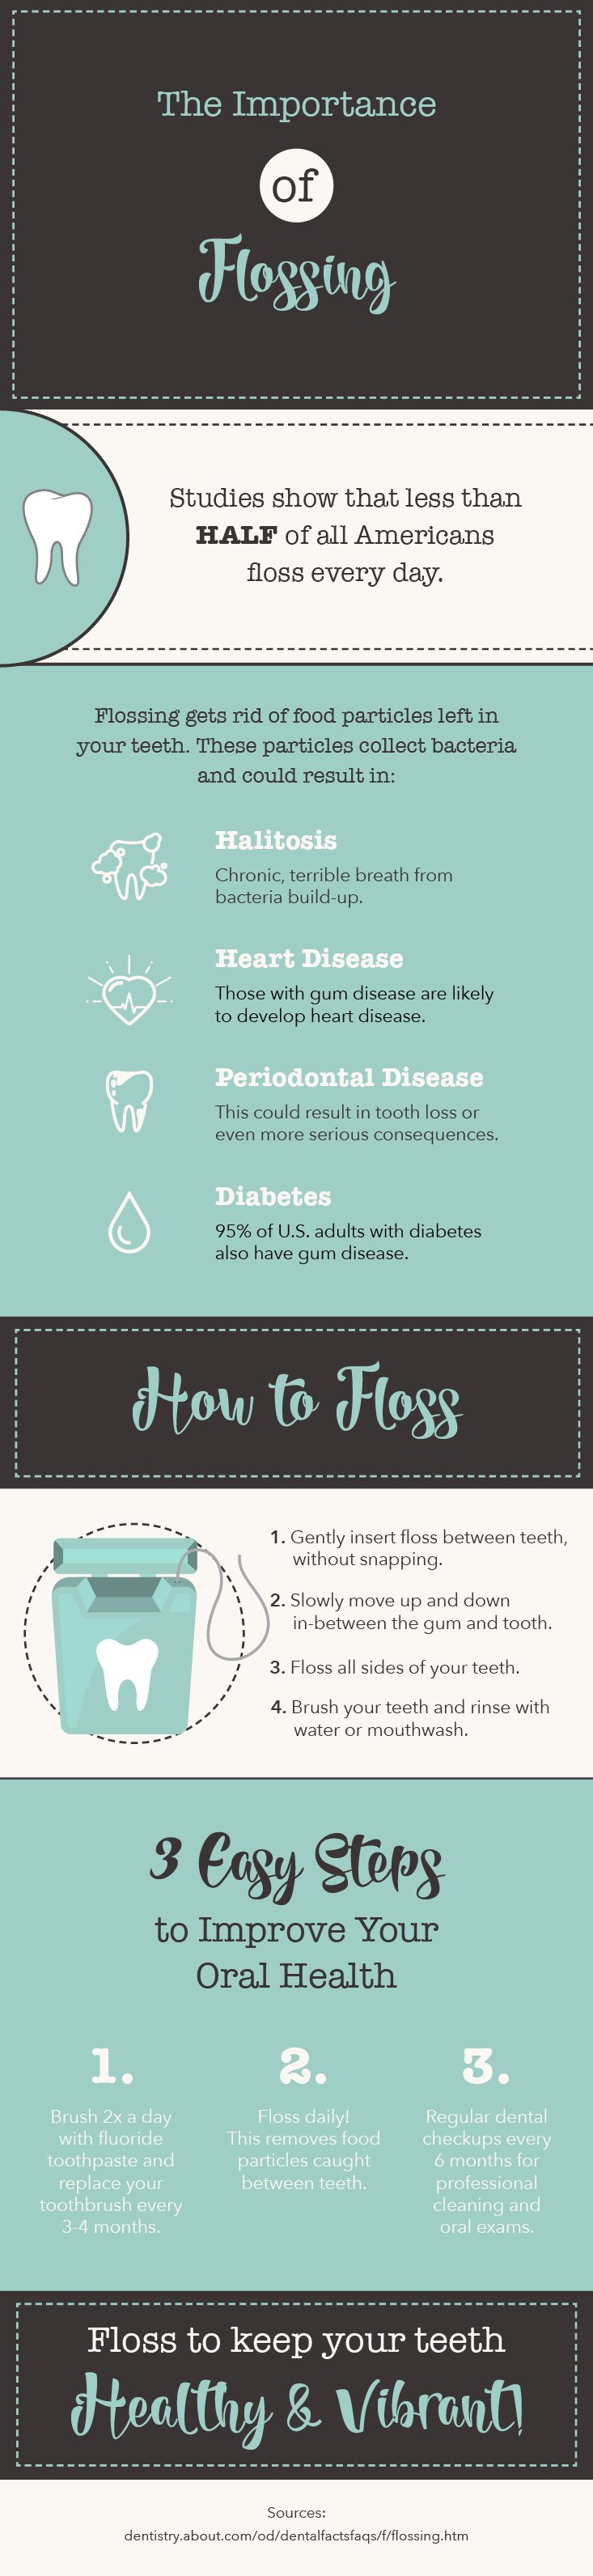 Importance of flossing infographic